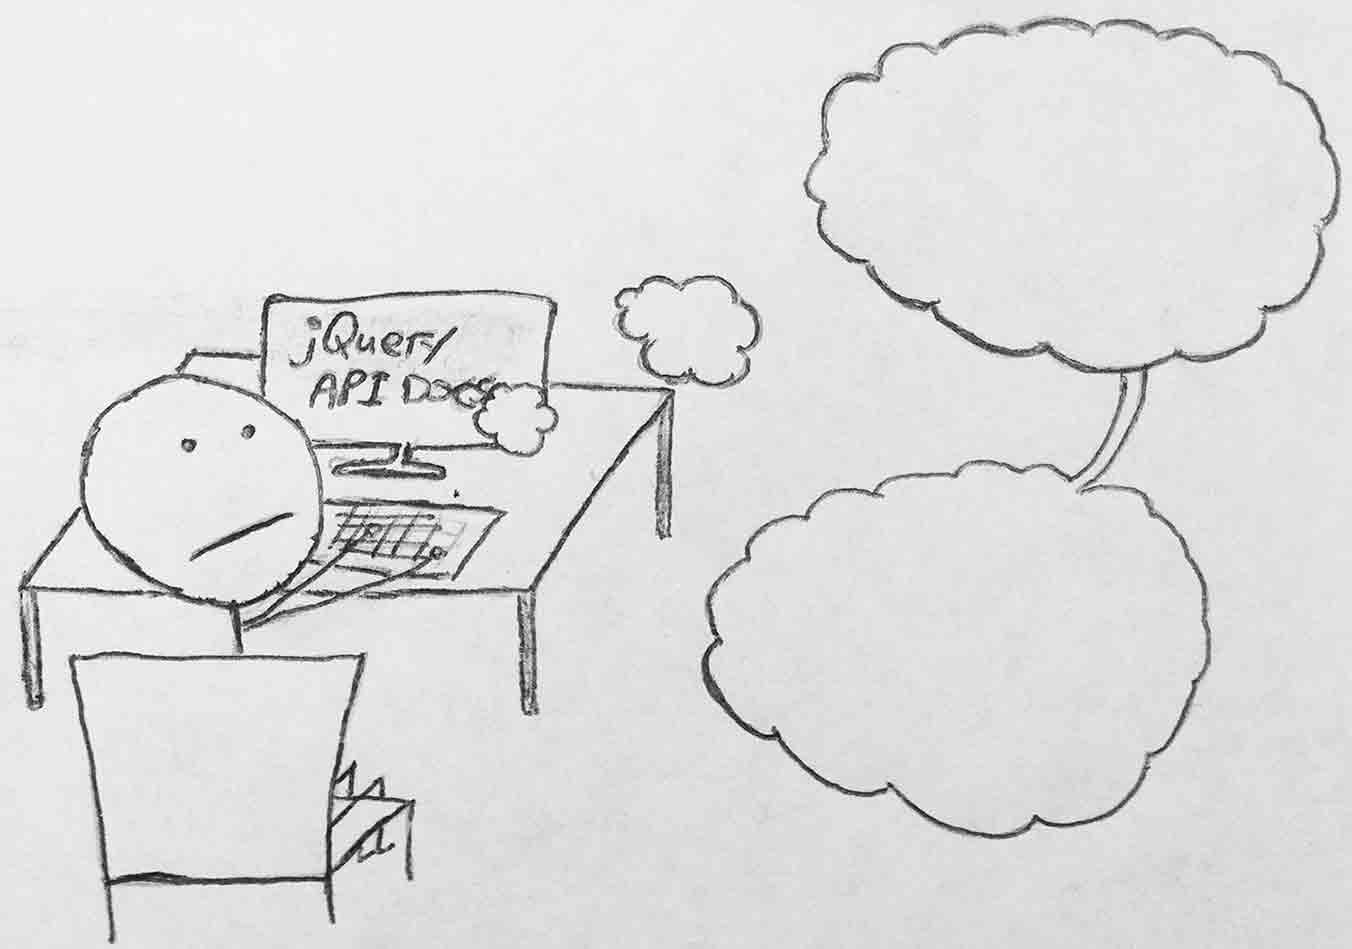 The first panel from this comic strip. Our hero sits at his desk working with jQuery, gazes upwards and ponders.